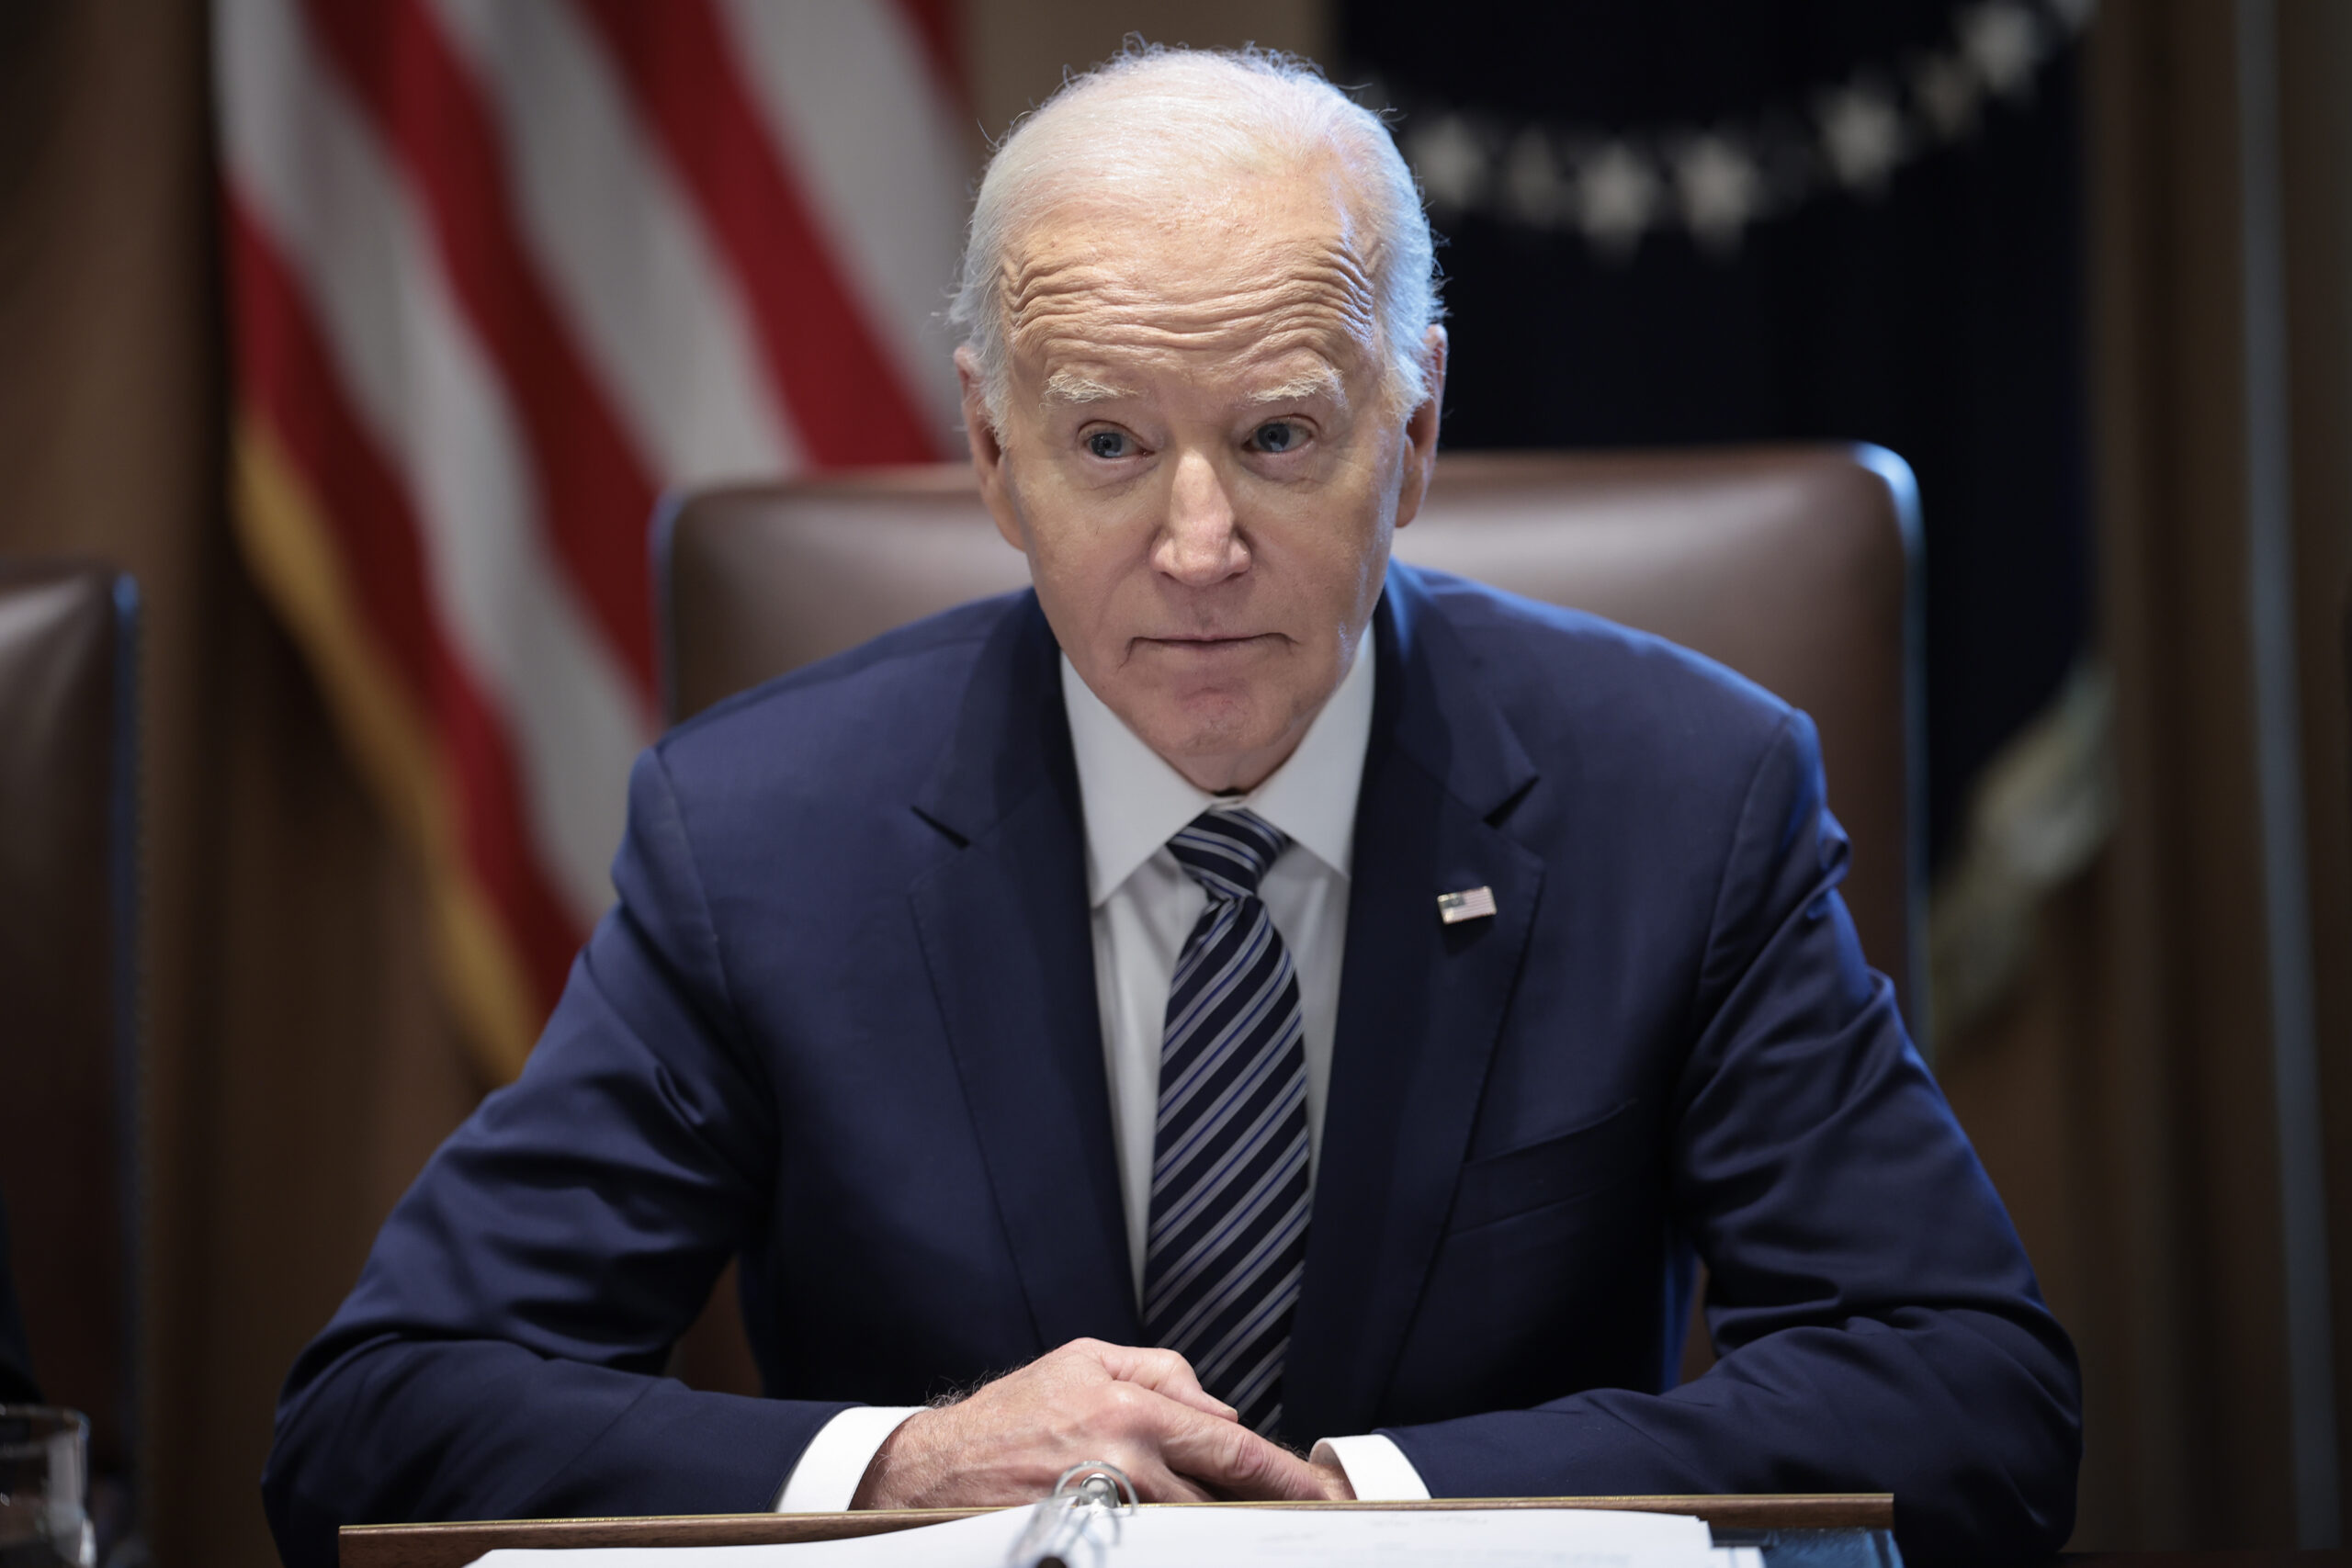 SCOTUS Ruling Questions Timing of Biden’s Immigration Order